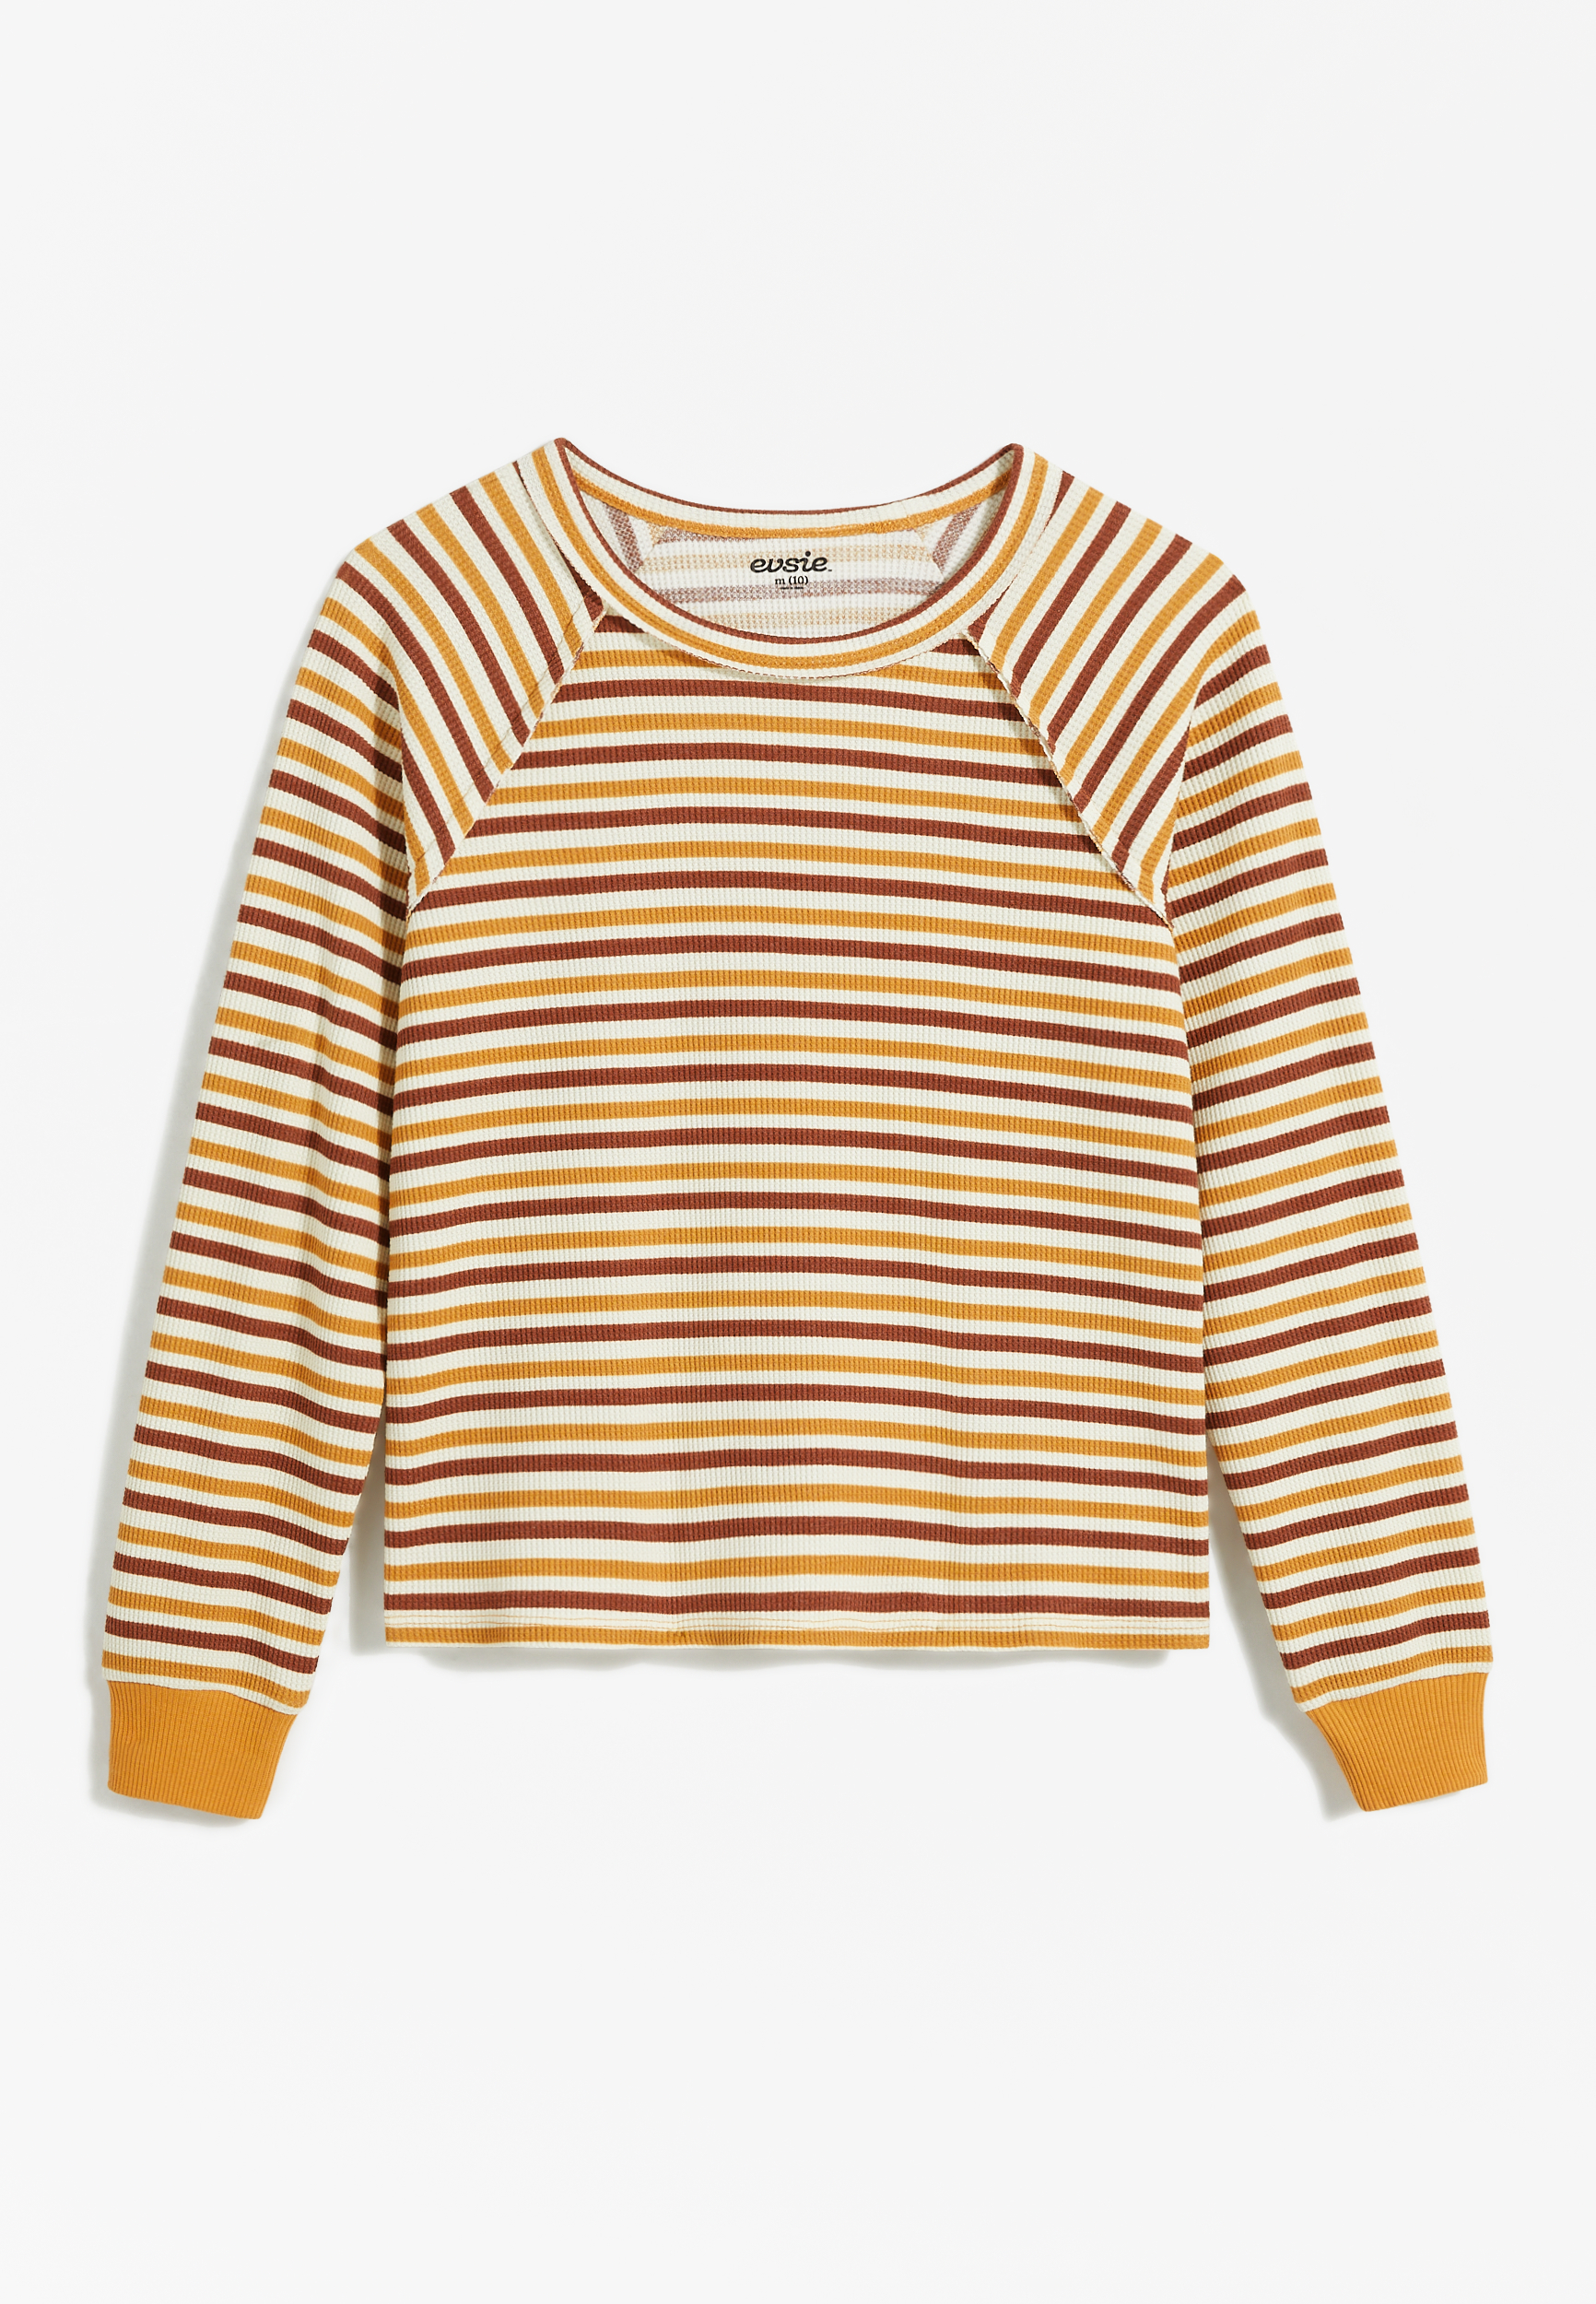 Girls Striped Long Sleeve Tee | maurices